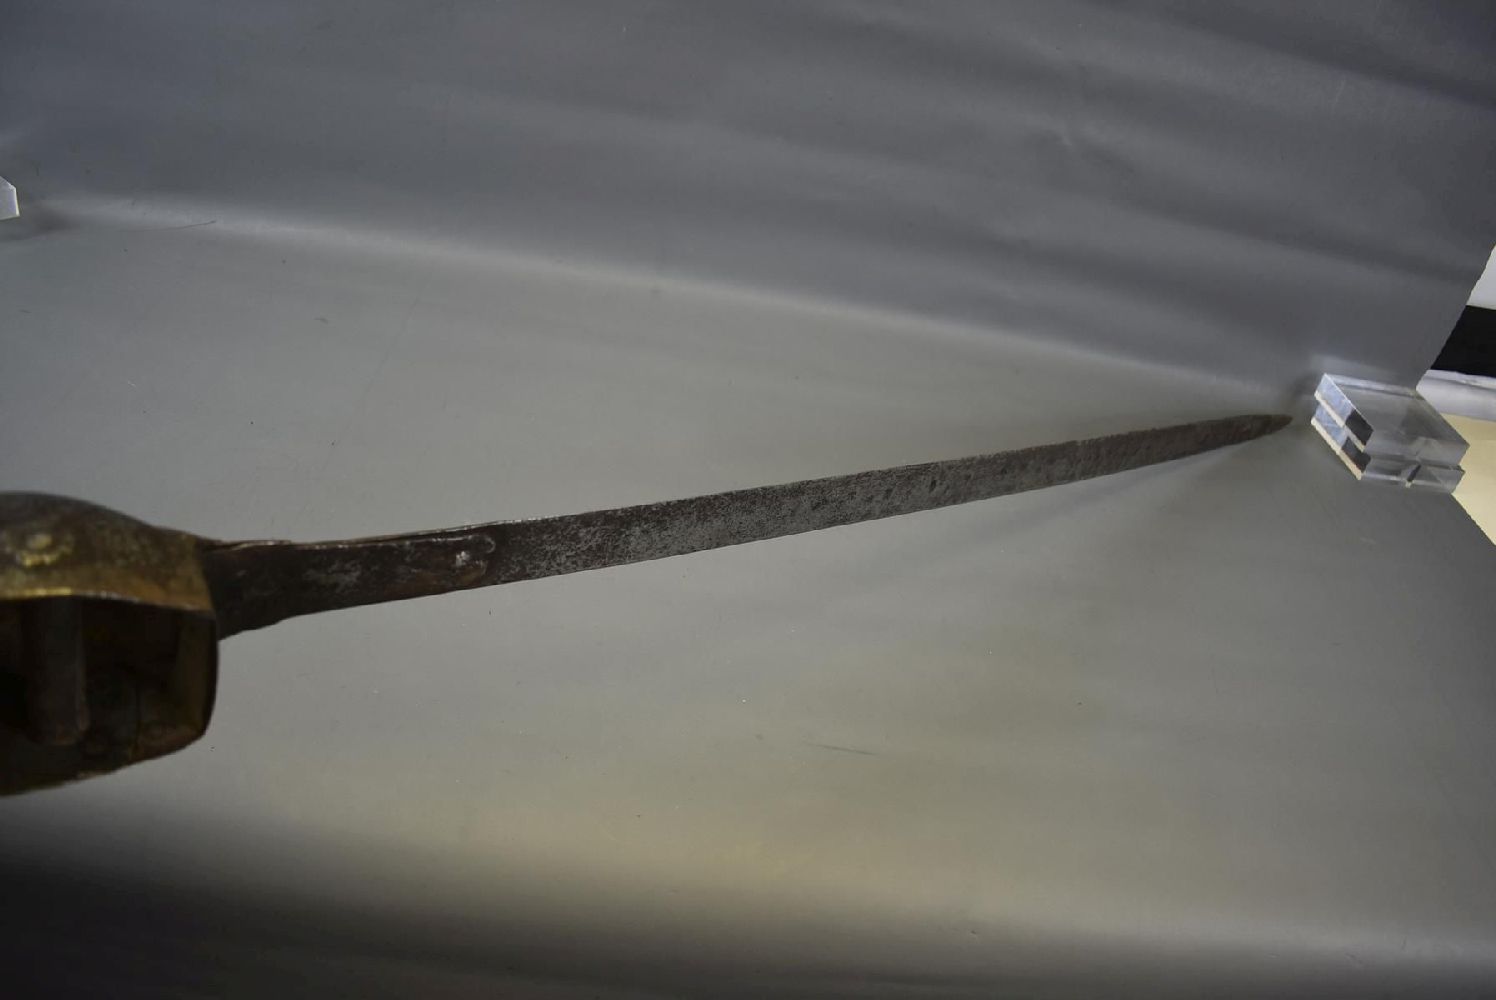 A LATE 18TH CENTURY INDIAN PATA OR SWORD, 96cm blade with riveted reinforcing straps at the forte, - Image 7 of 8